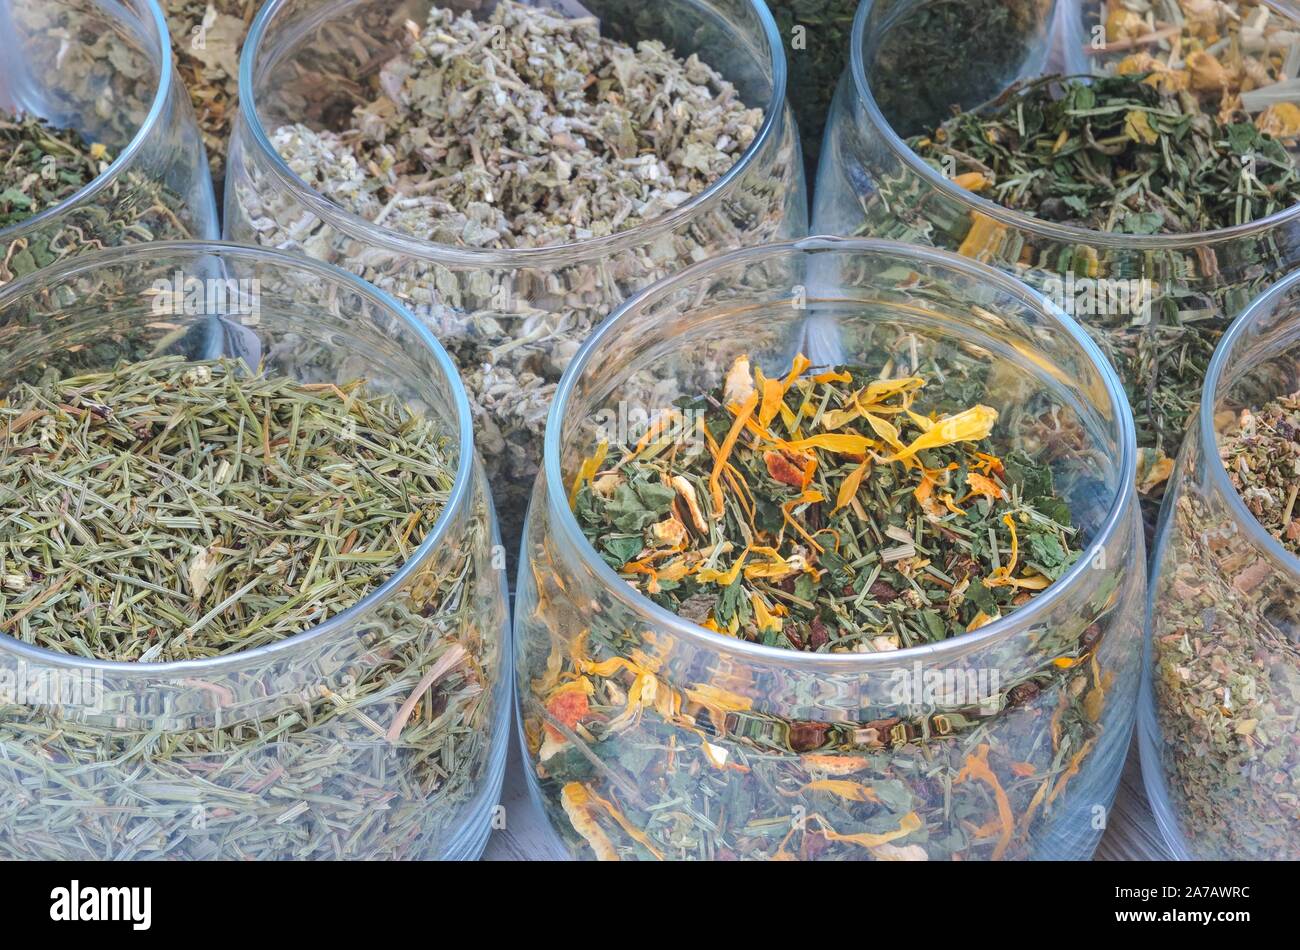 Set of various herbs. Herbal teas in jars on a wooden table. Stock Photo